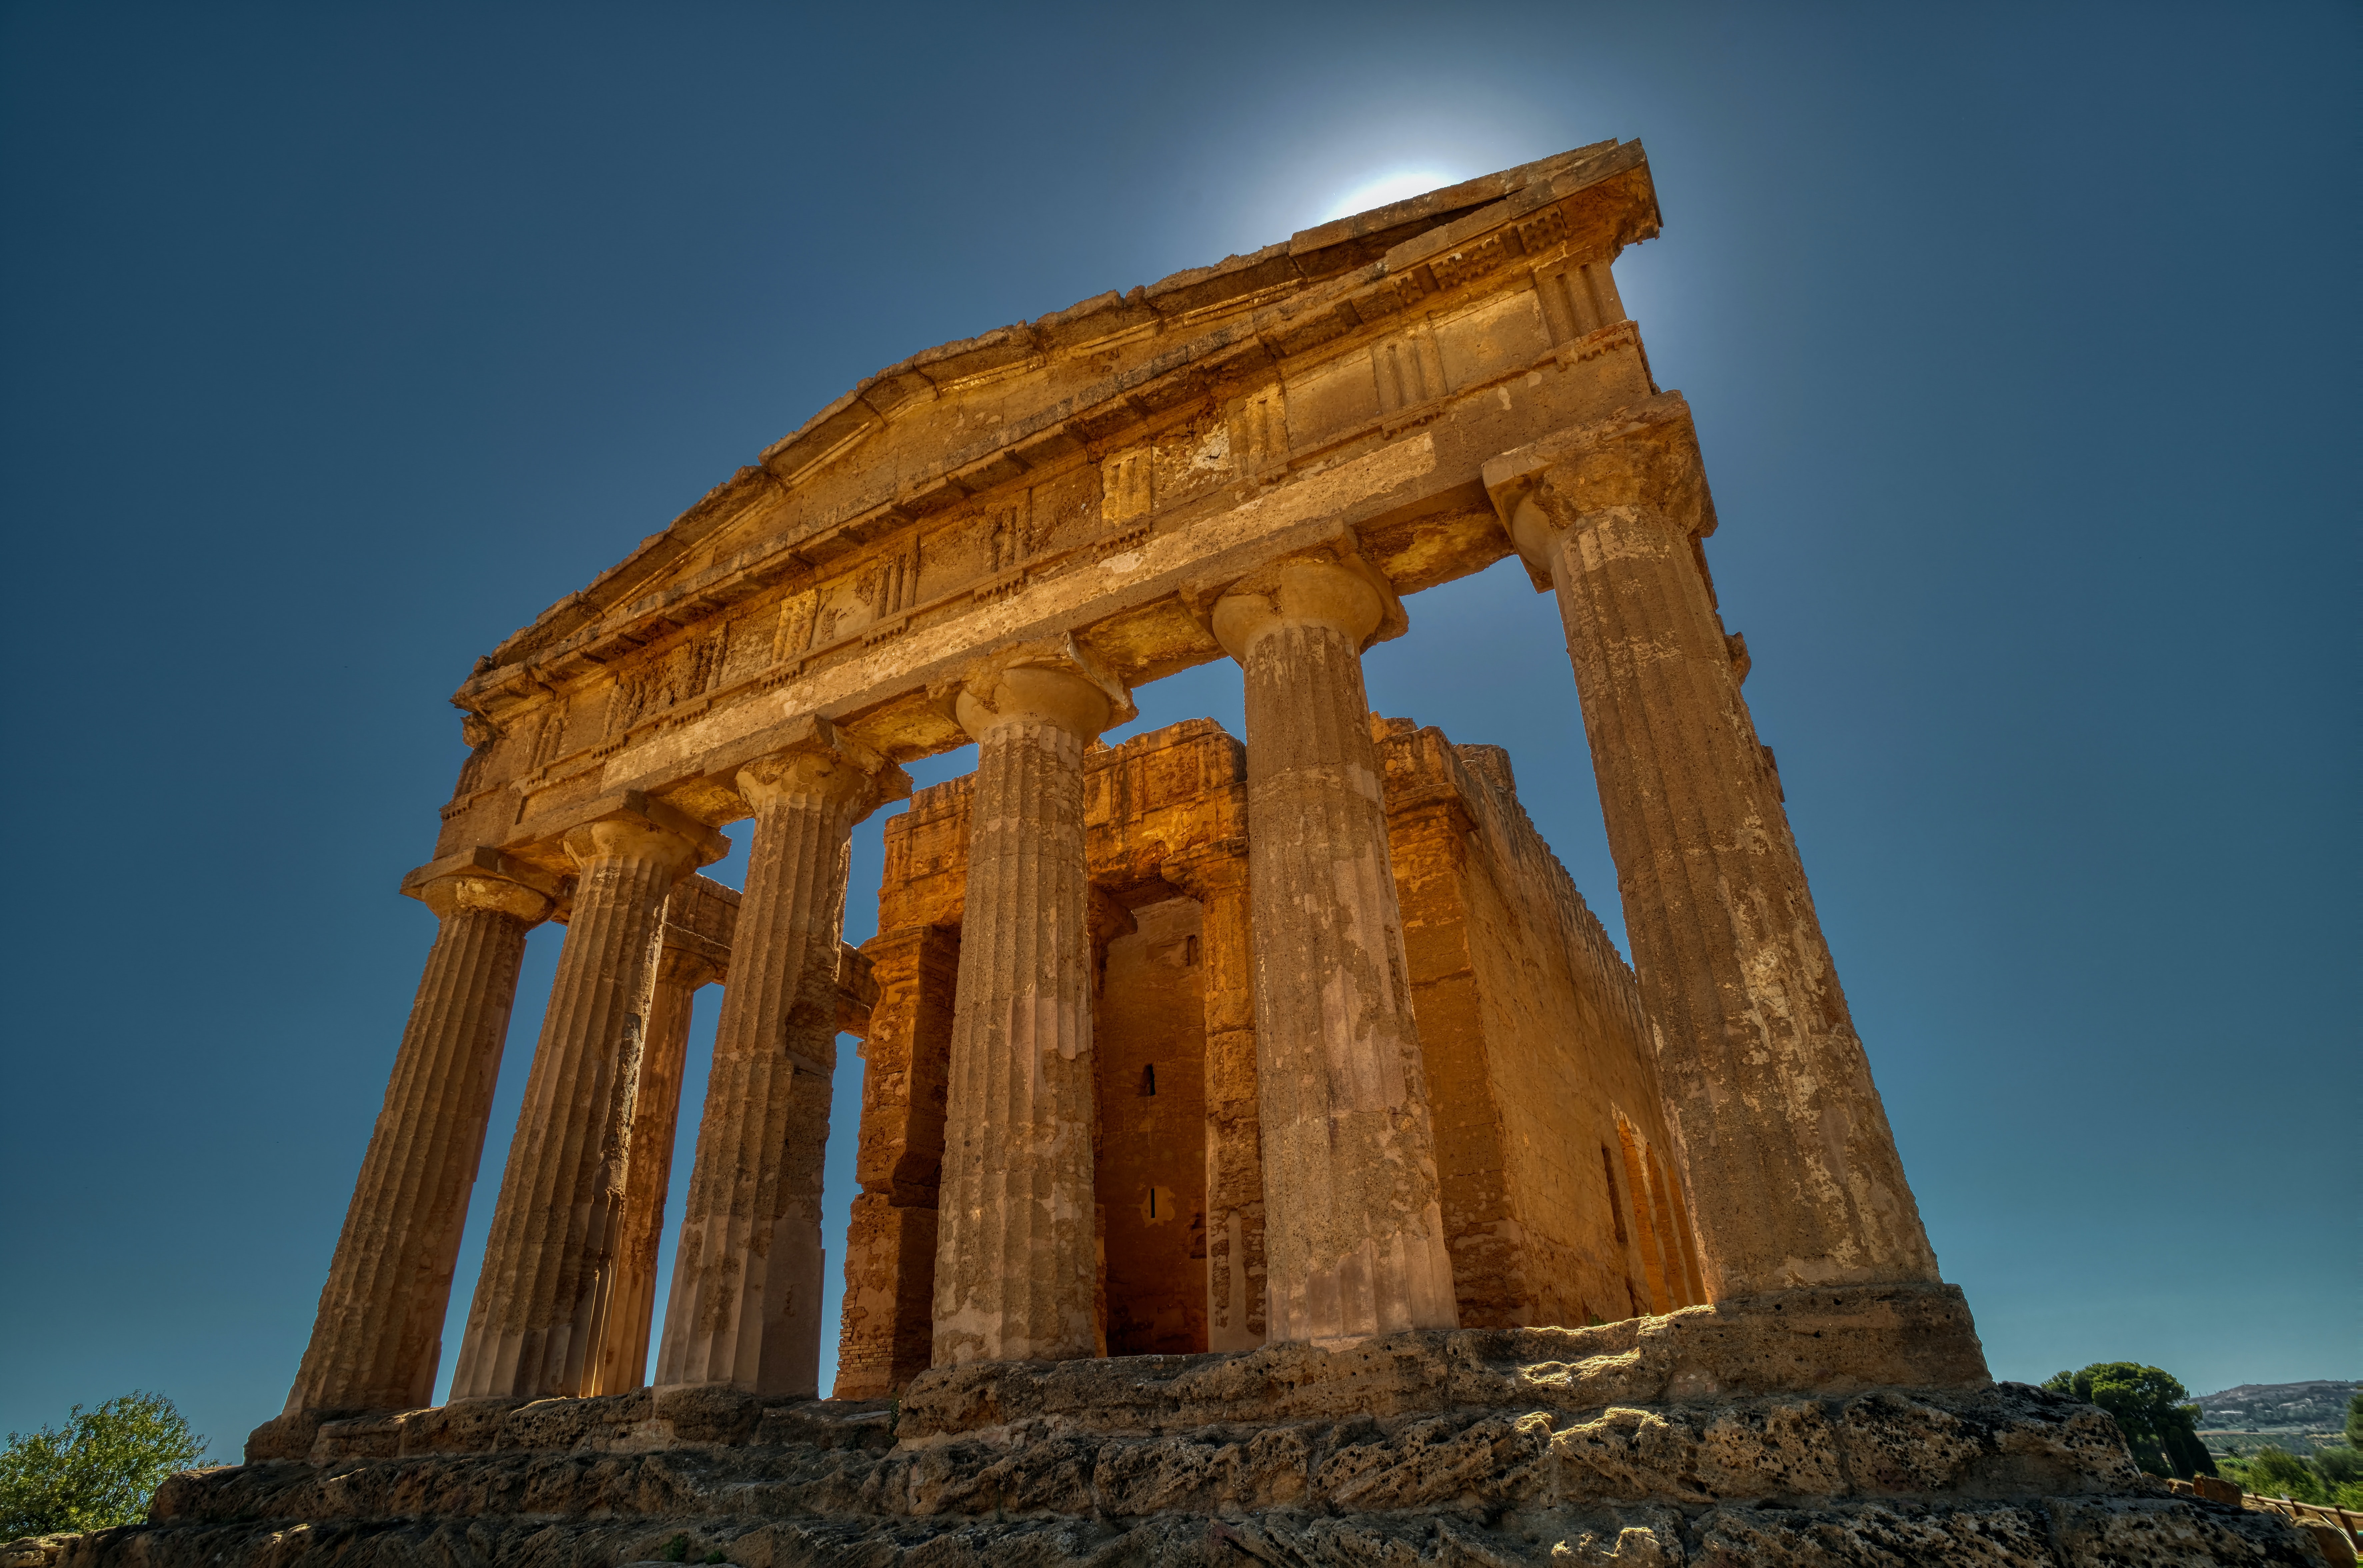 Temple of Concordia sits in the Valley of the Temples surrounded by trees during luxury Sicily tour